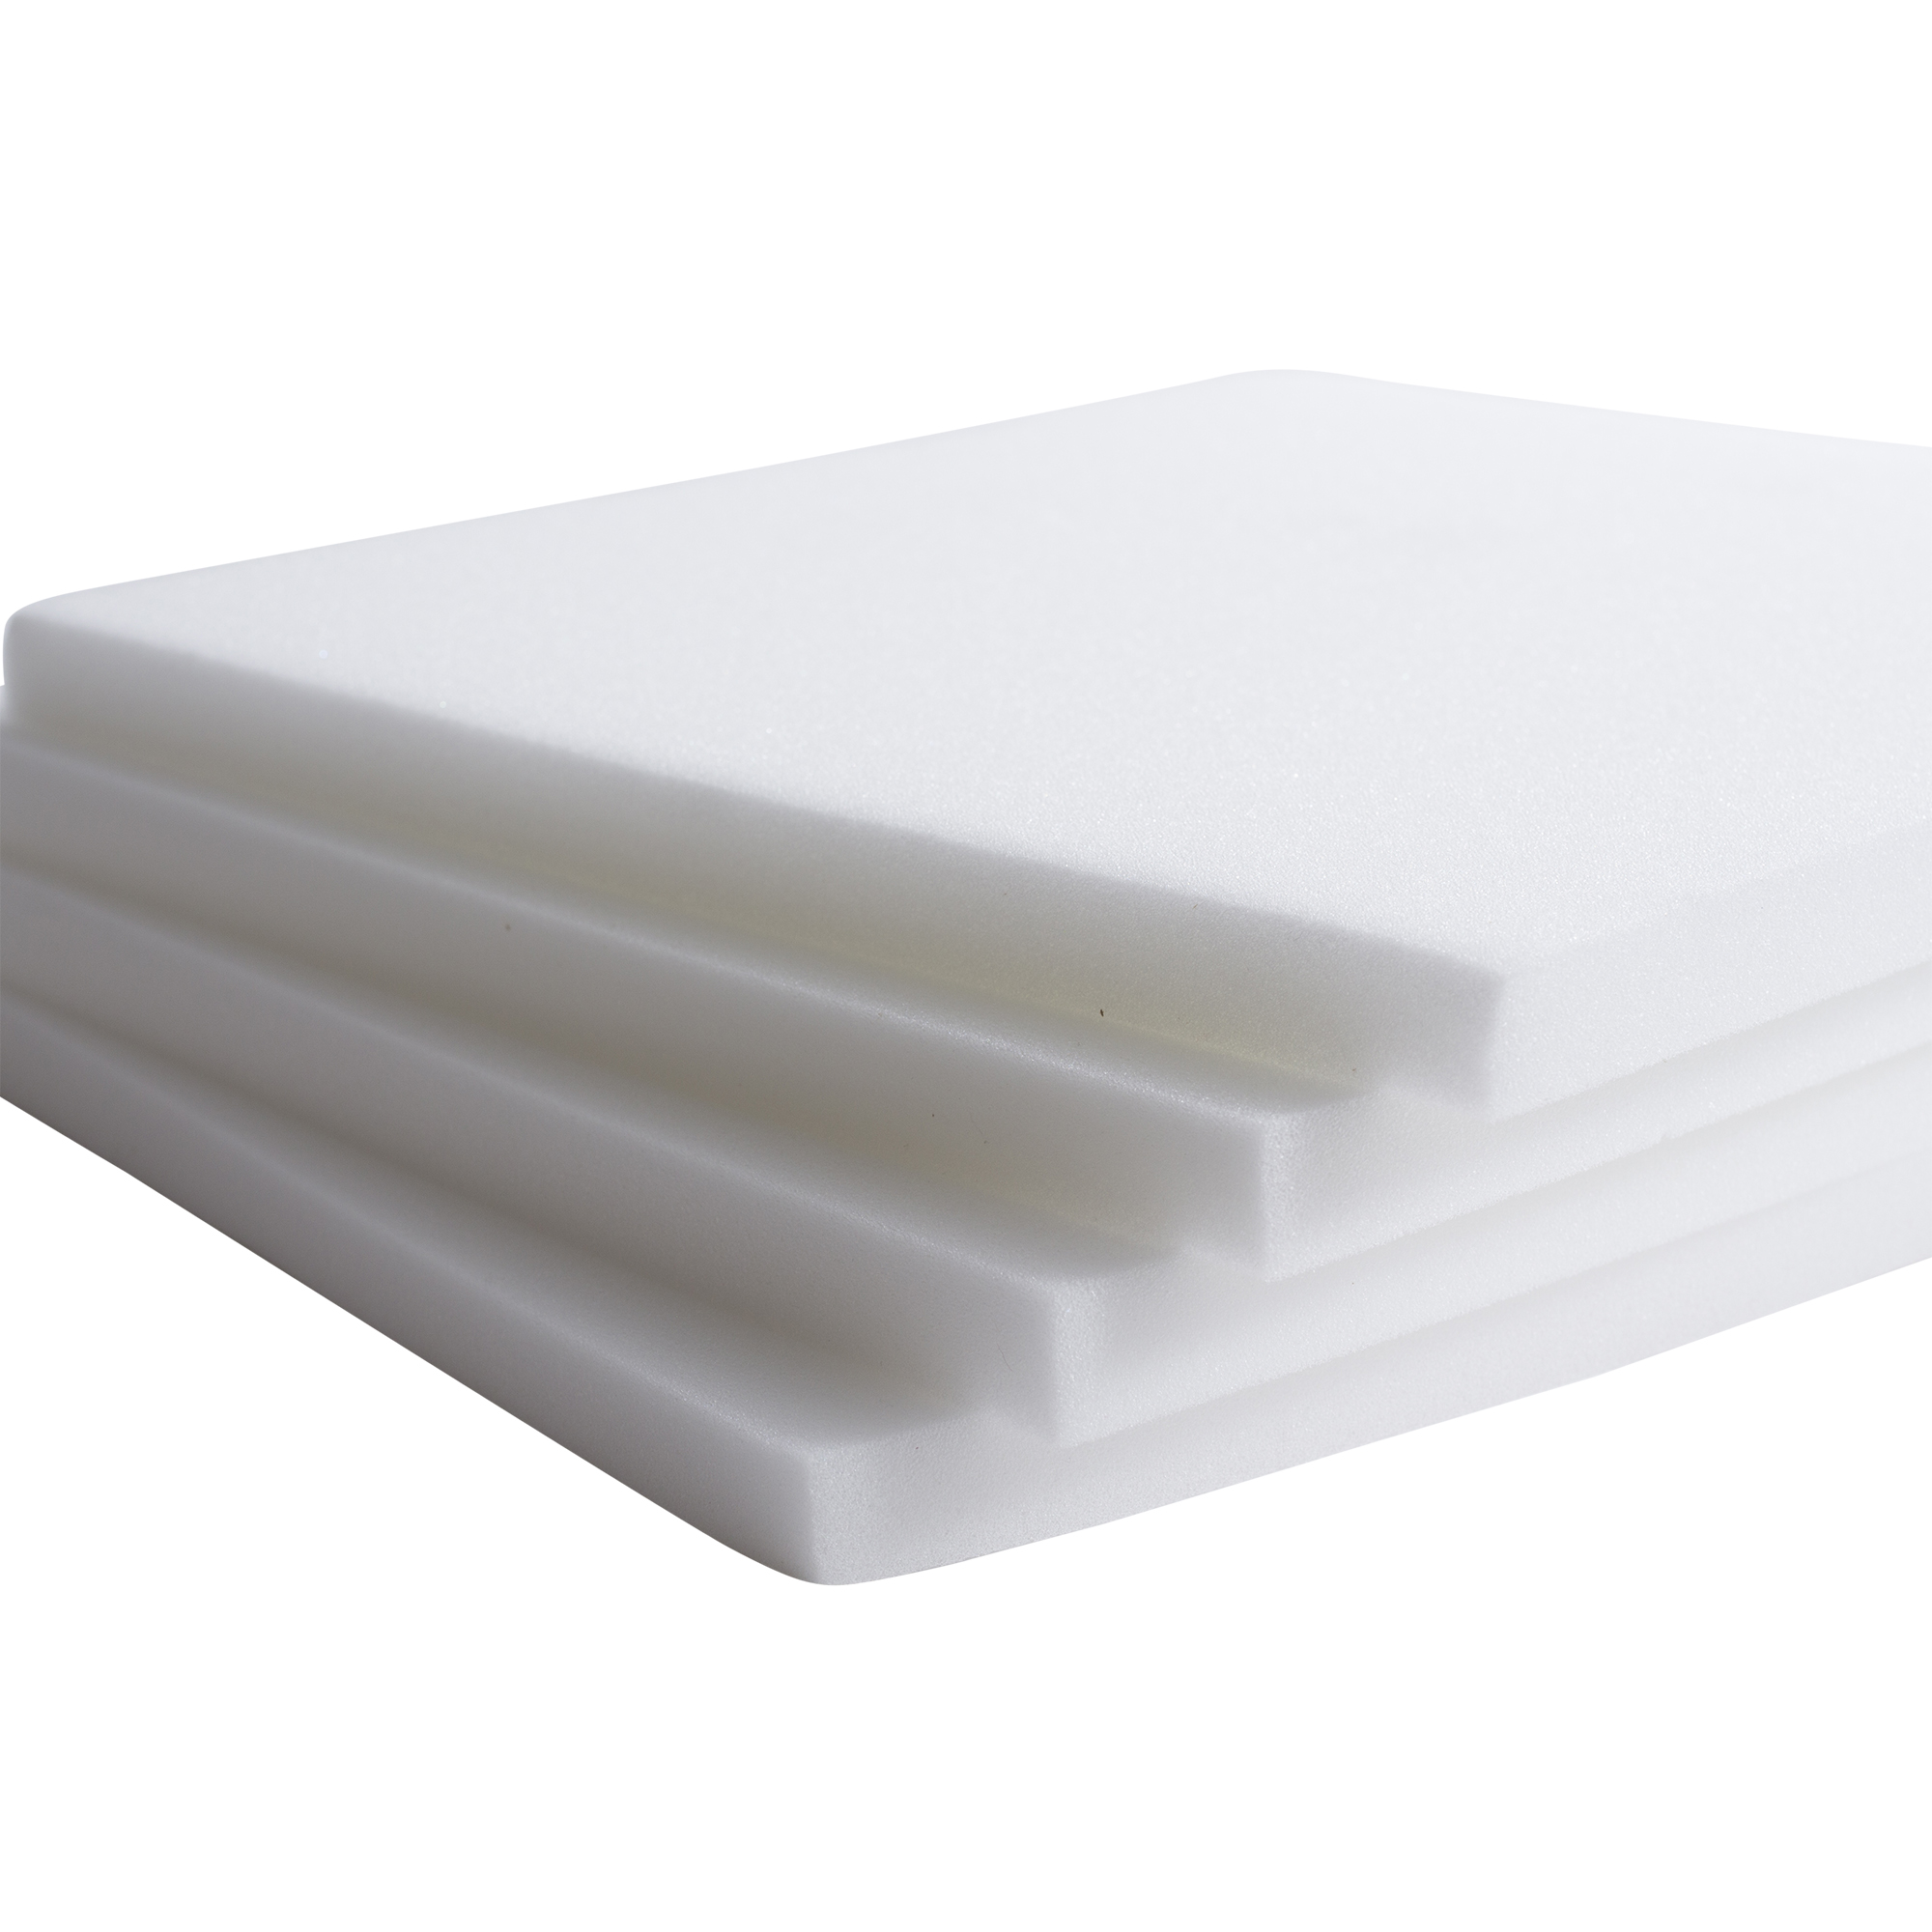 Project Foam Pad by Fairfield™, 16" x 16" x 1" Thick (4 pack) - image 3 of 6